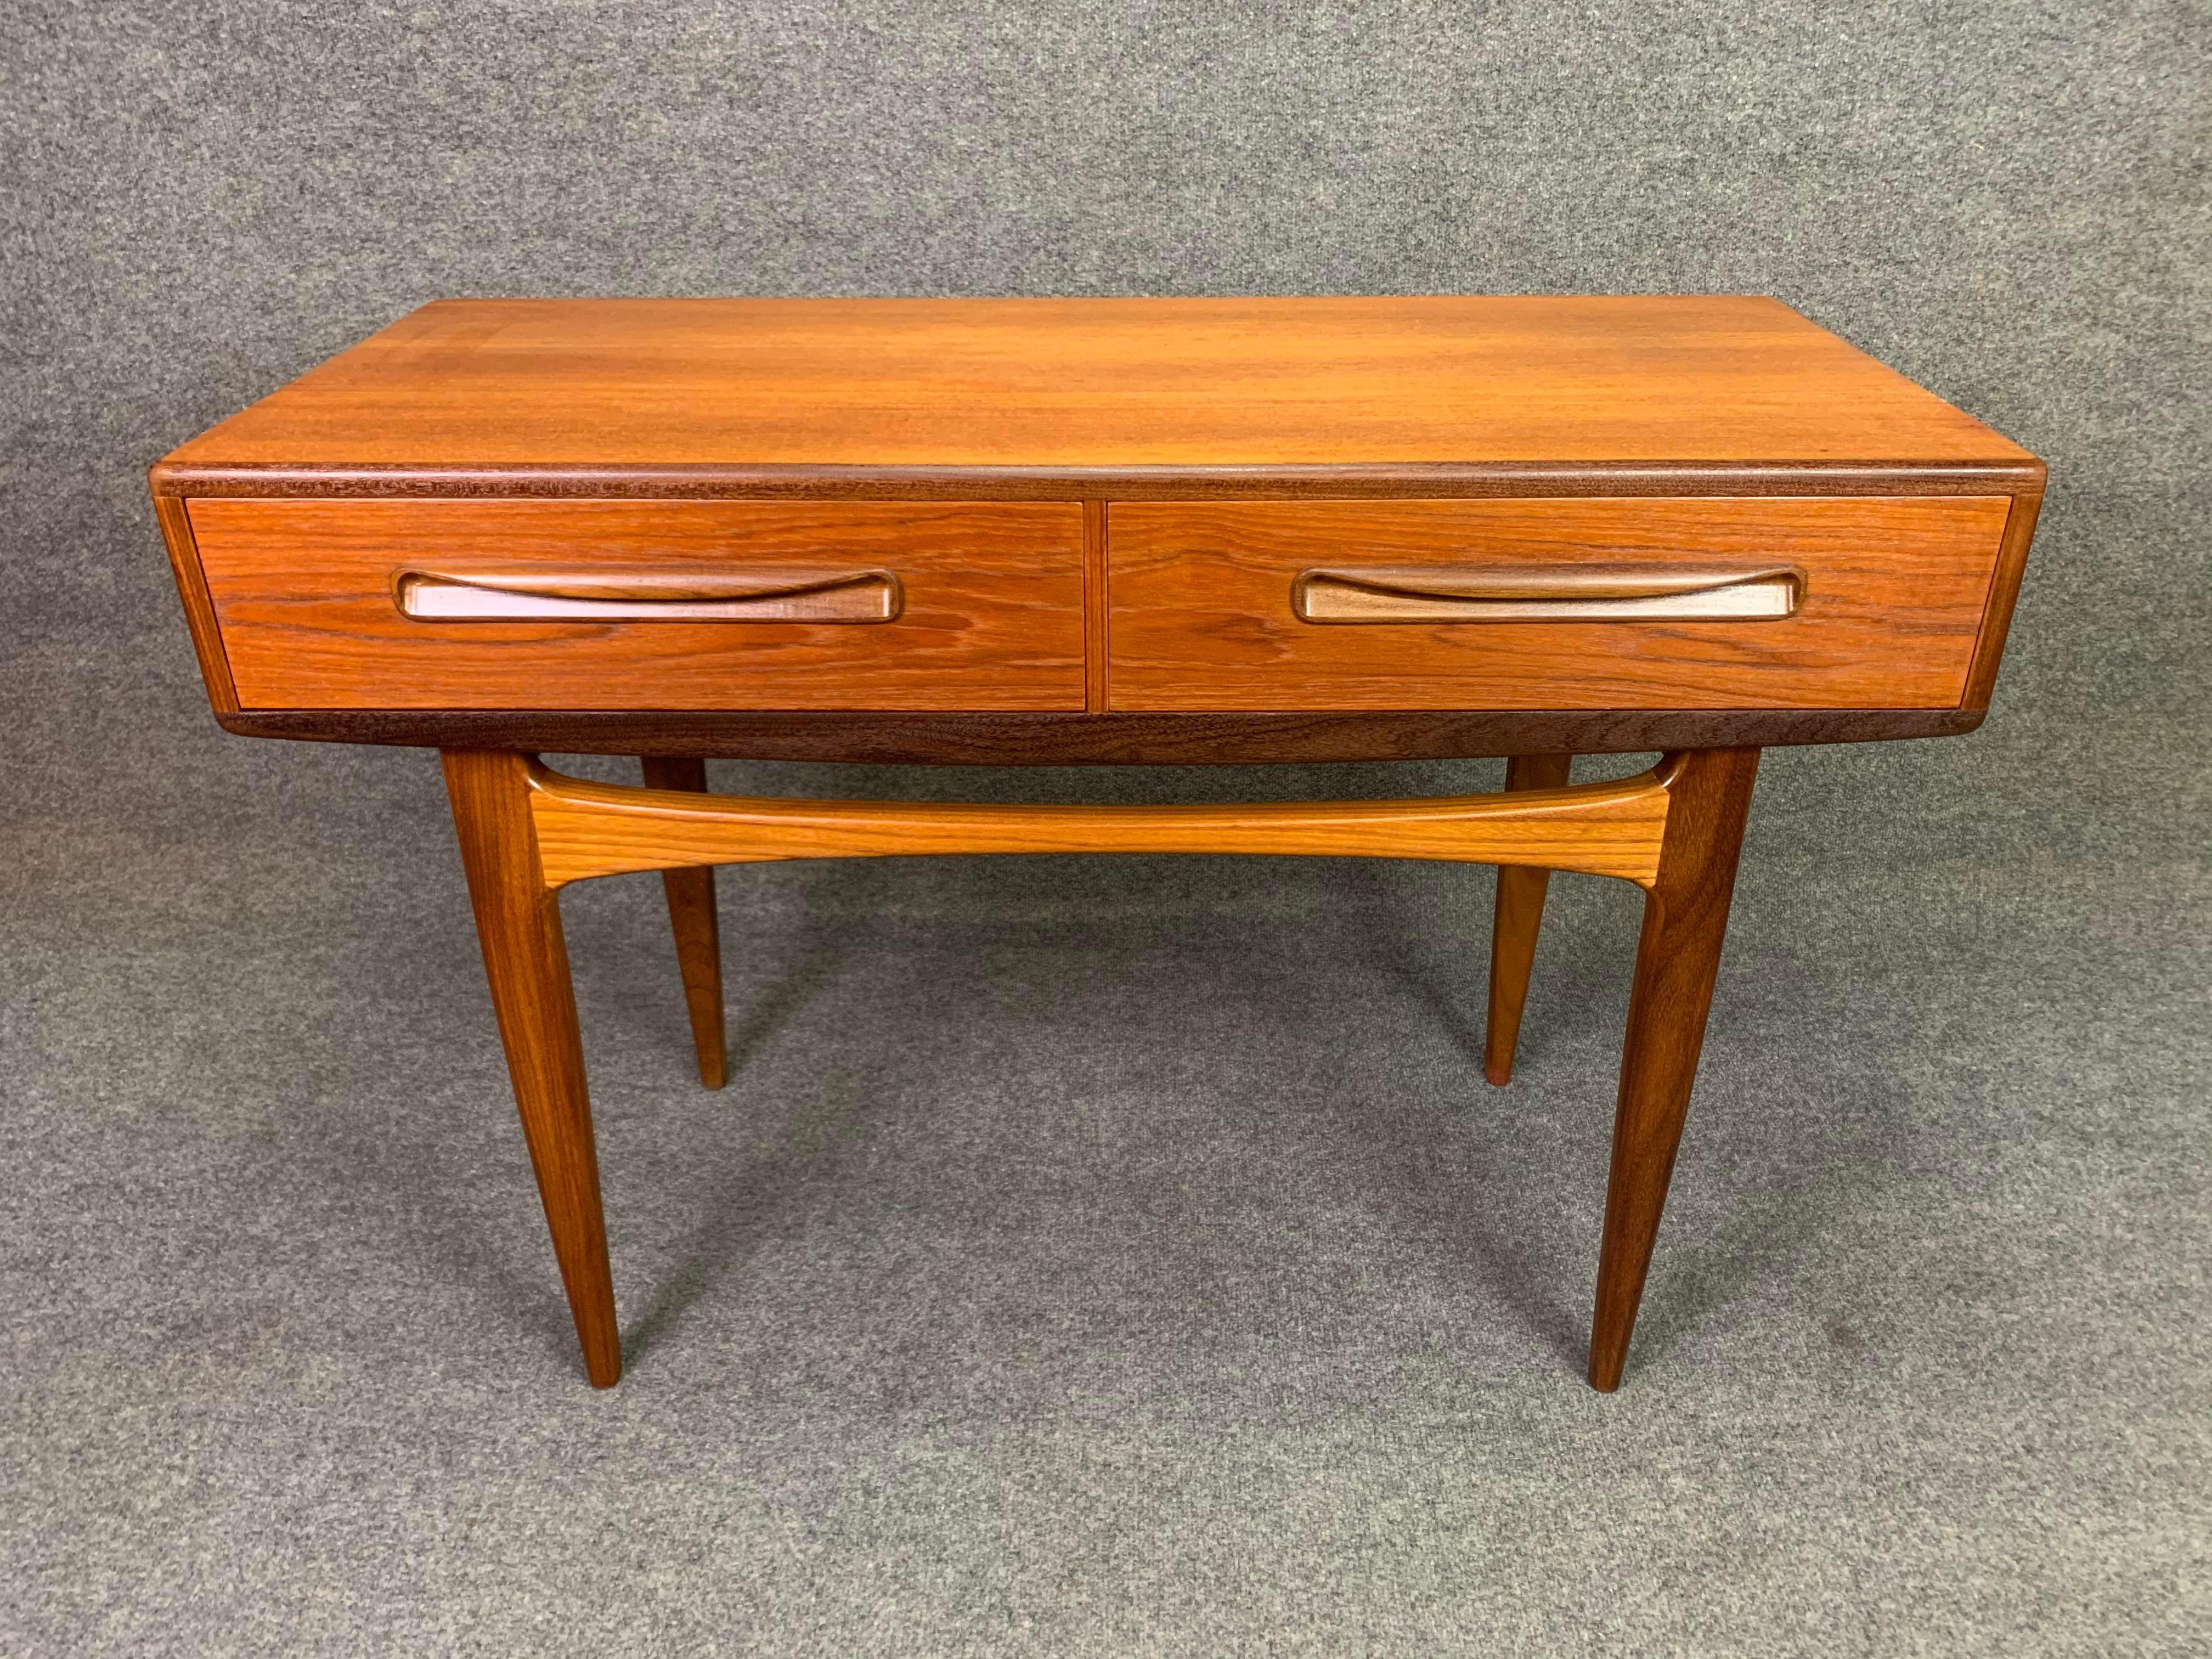 Here is a rare british Mid-Century Modern teak entry table - console part of the sought after 